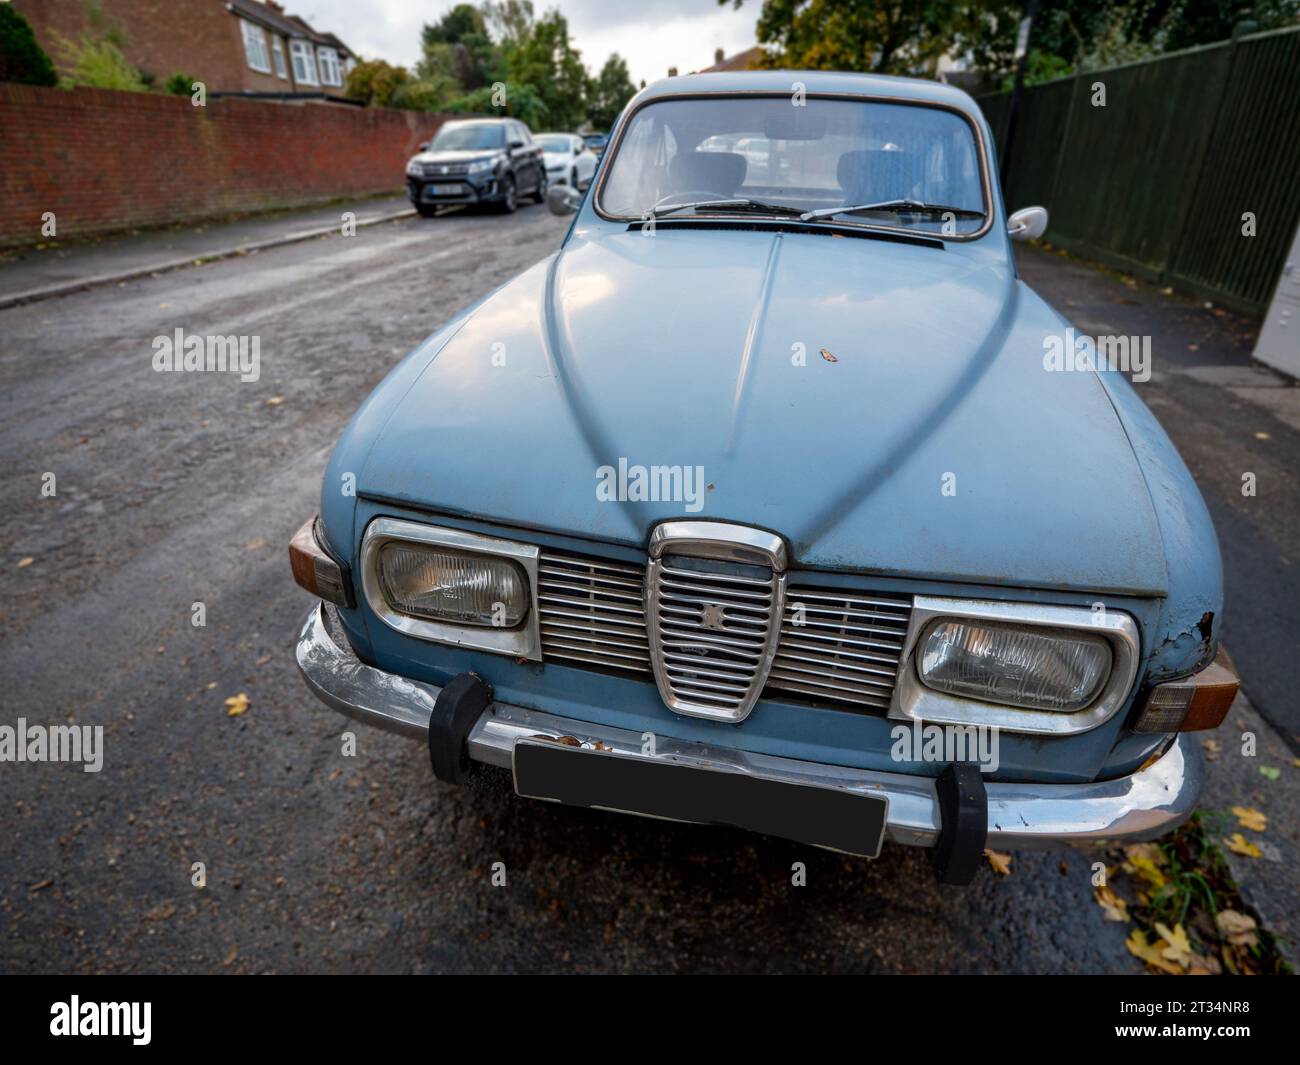 A 1971 Saab 96 V4 Classic car parked in London.  Classic cars more than 40 years old are exempt from ULEZ, leading to a renewed interest in buying vintage reliable cars over 40 years old. Stock Photo